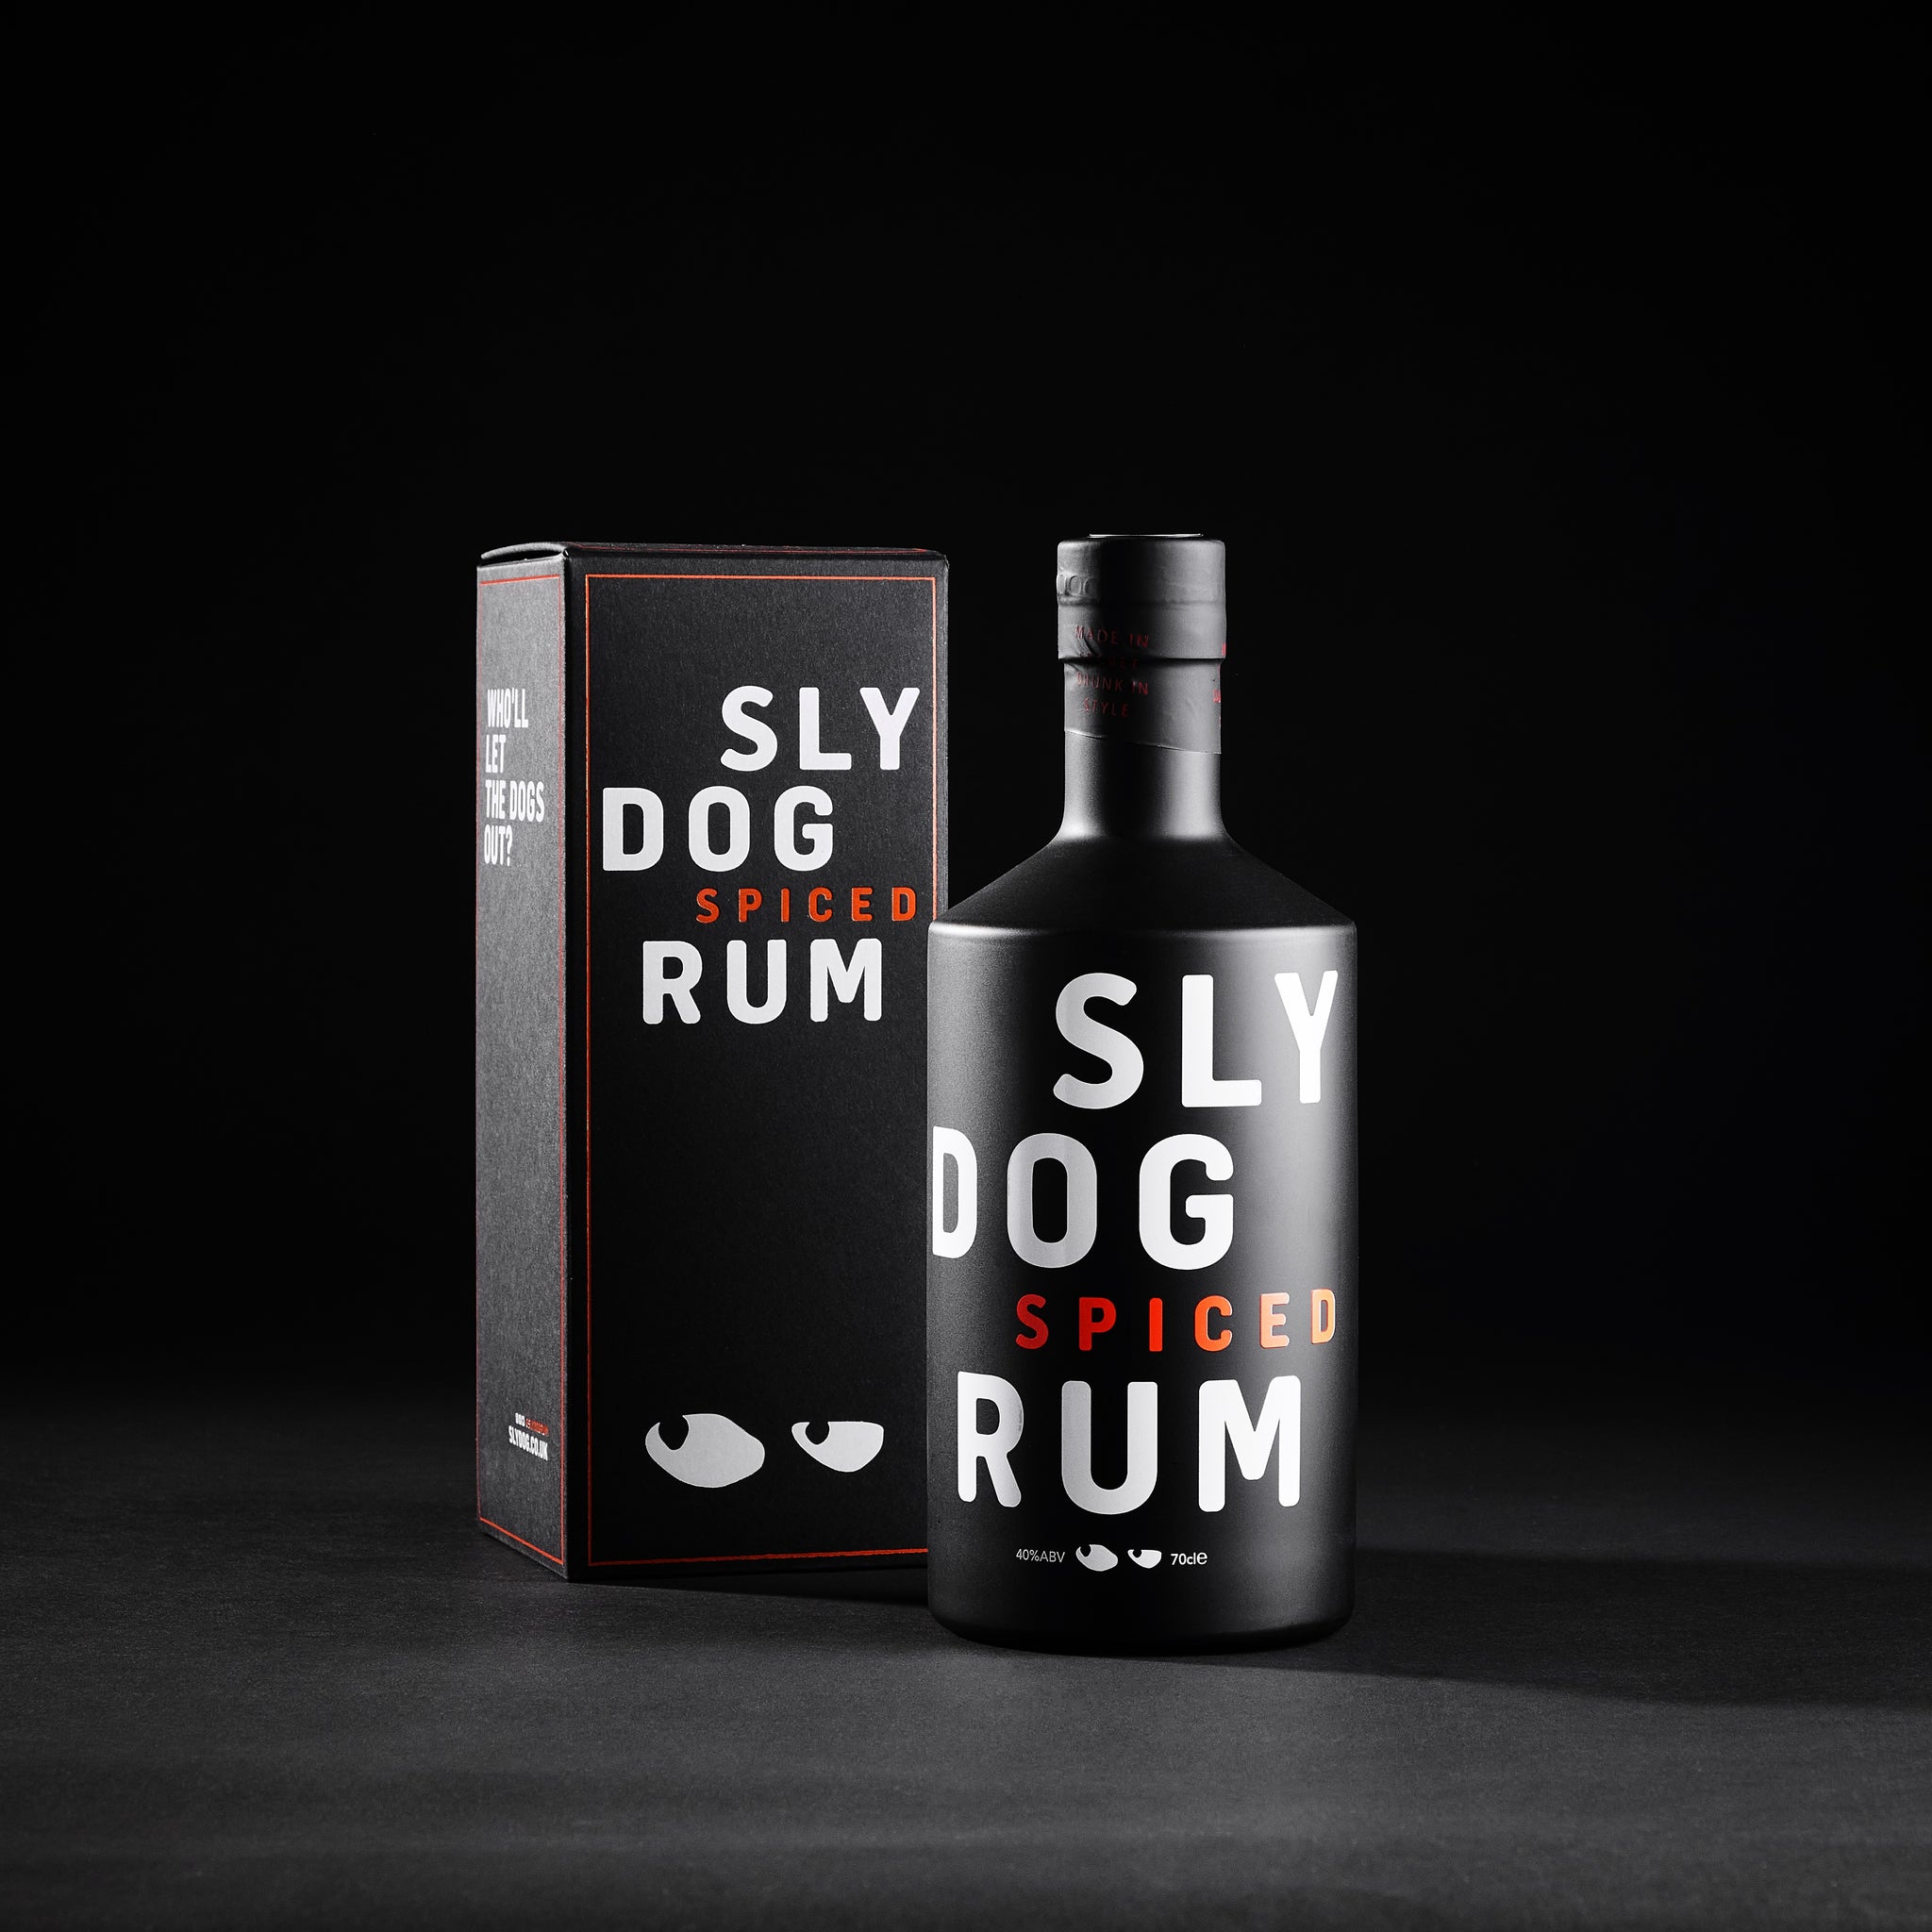 SLY DOG Spiced Rum Gift Box